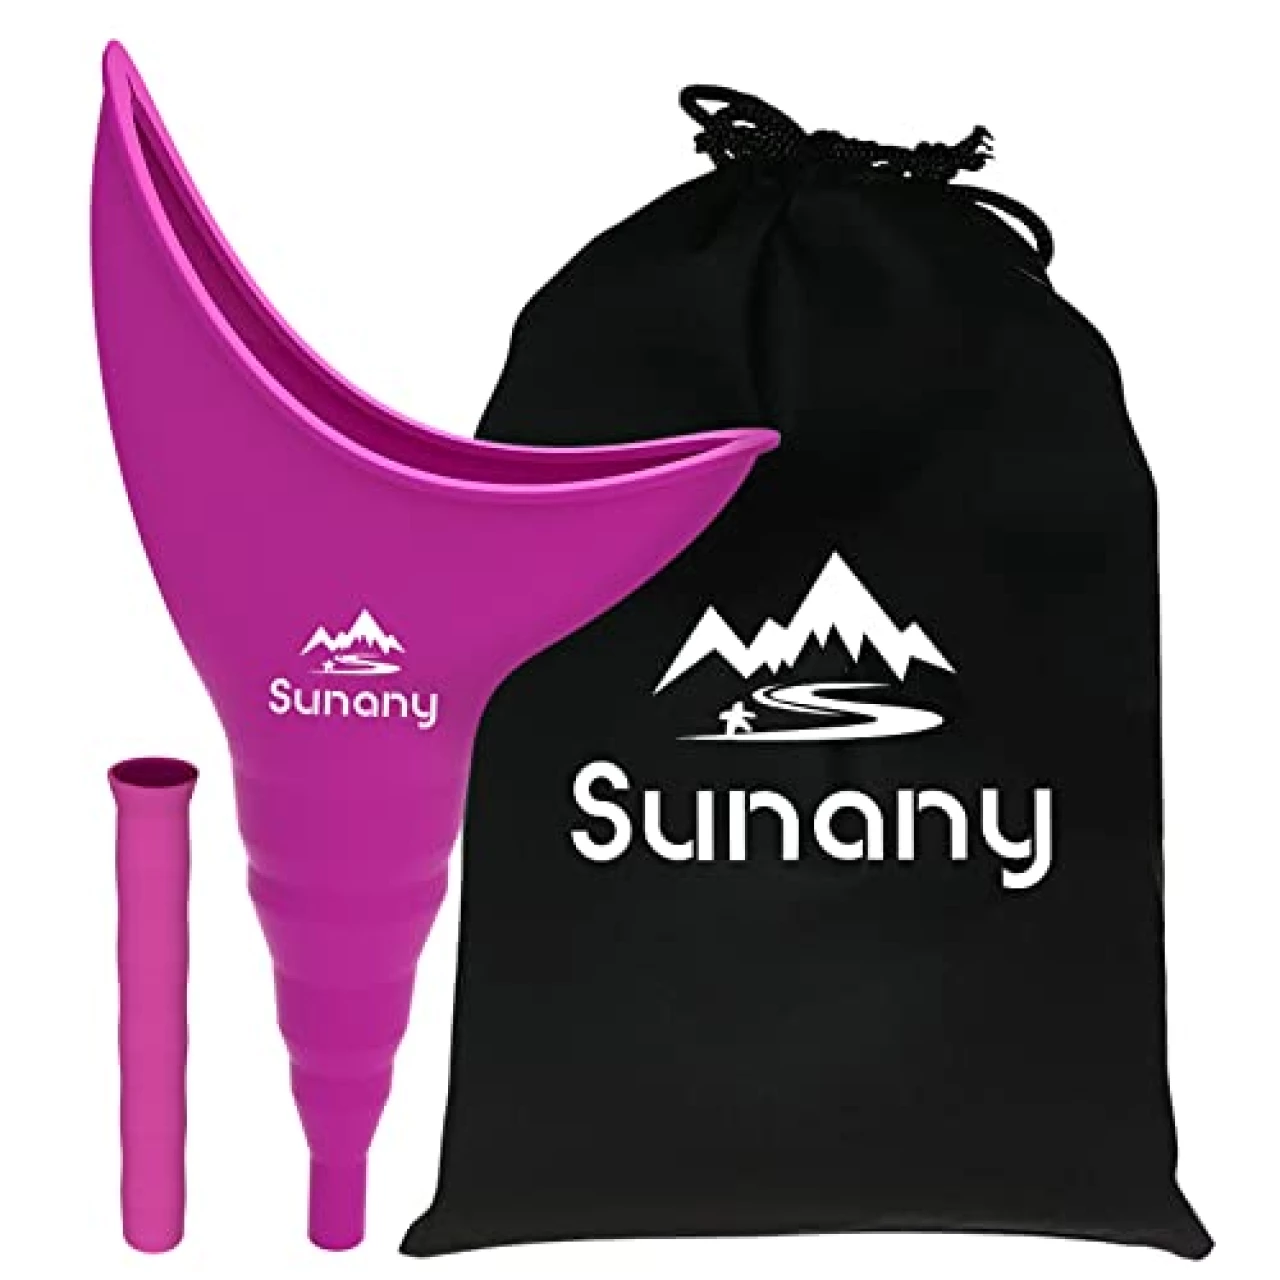 Female Urination Device,Reusable Silicone Female Urinal Foolproof Women Pee Funnel Allows Women to Pee Standing Up,Women&rsquo;s Urinal is The Perfect Companion for Travel and Outdoor (Fuchsia)